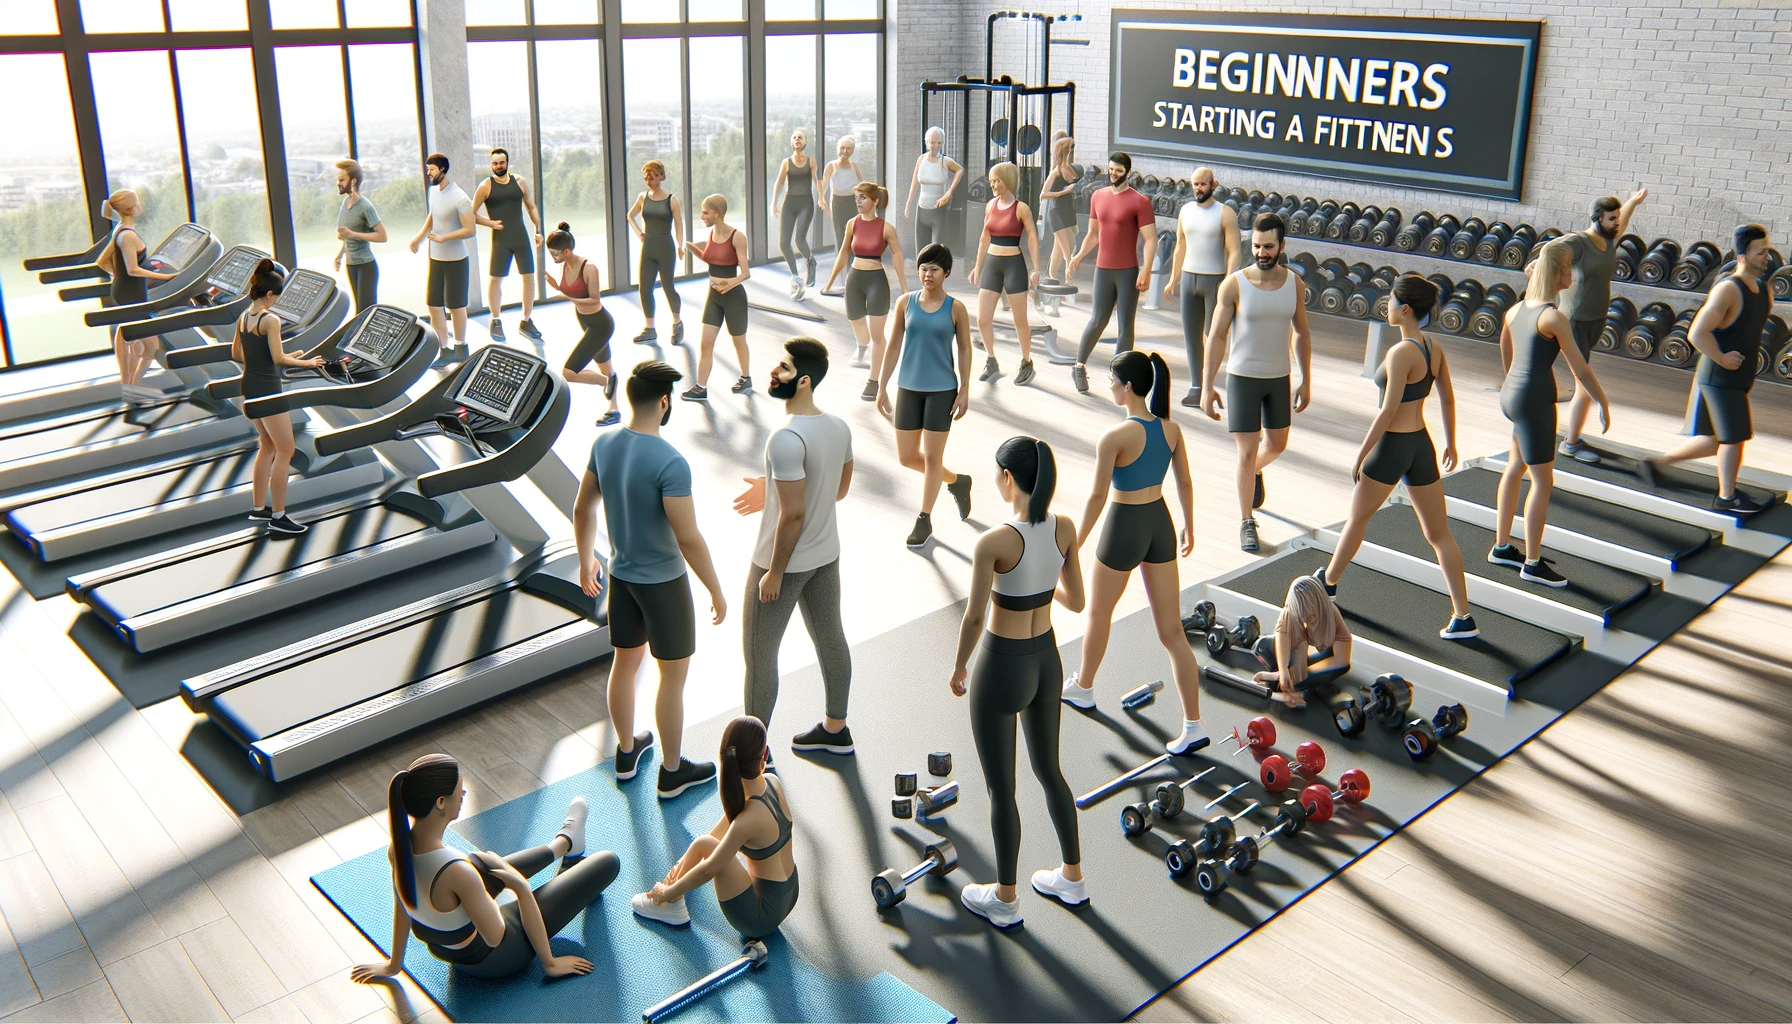 How Should Beginners Start A Fitness Routine?